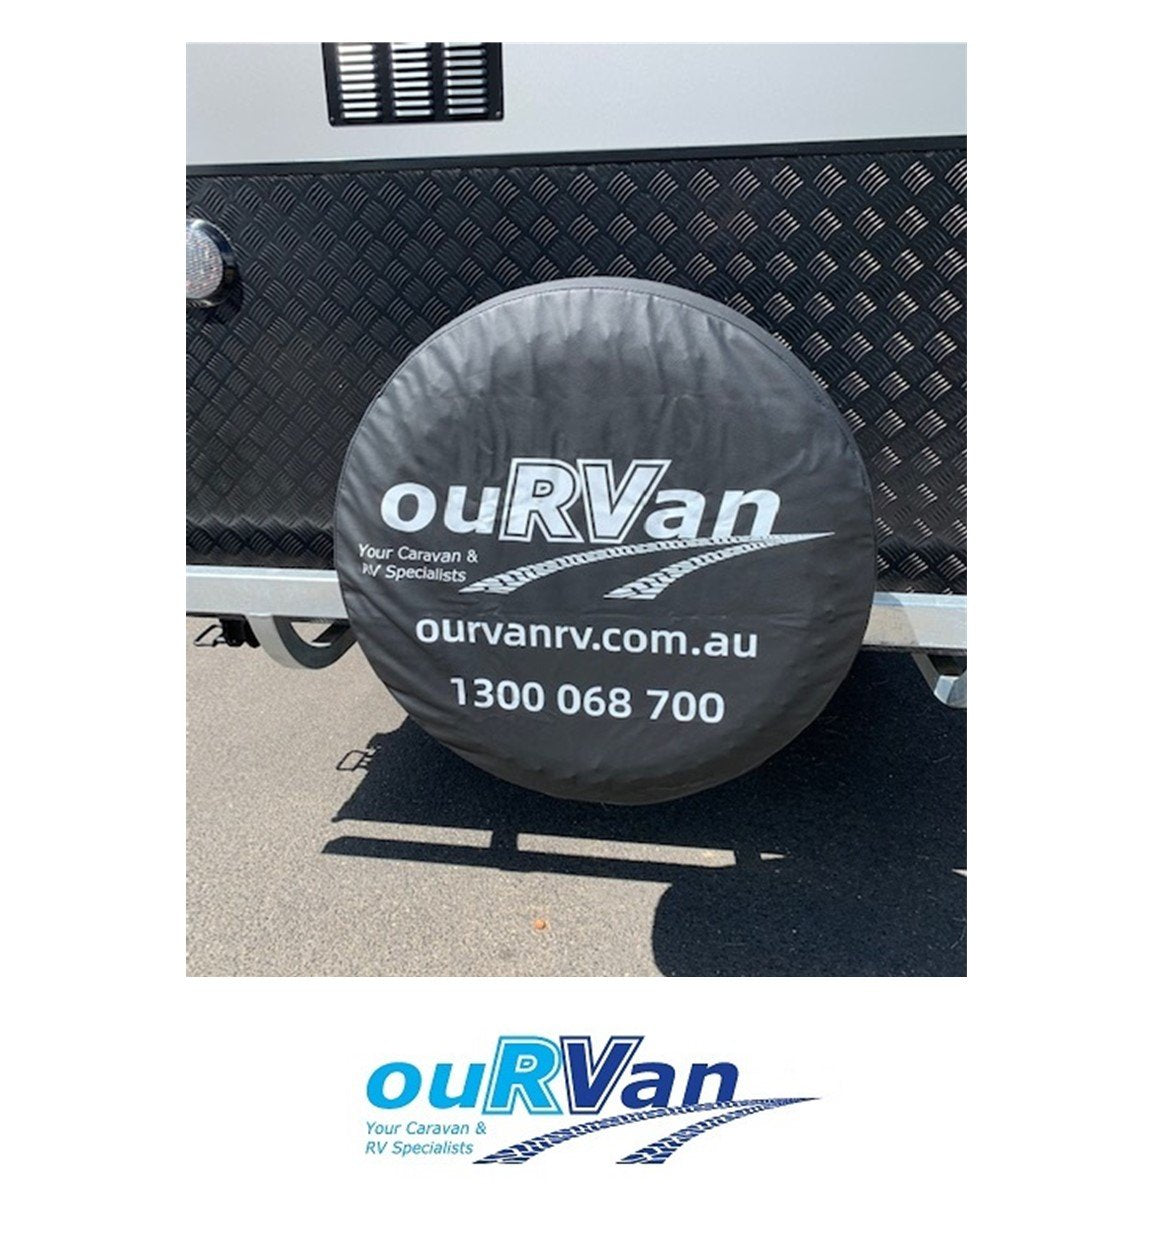 CARAVAN SPARE TYRE WHEEL COVER WITH LOGO SUIT TYRE